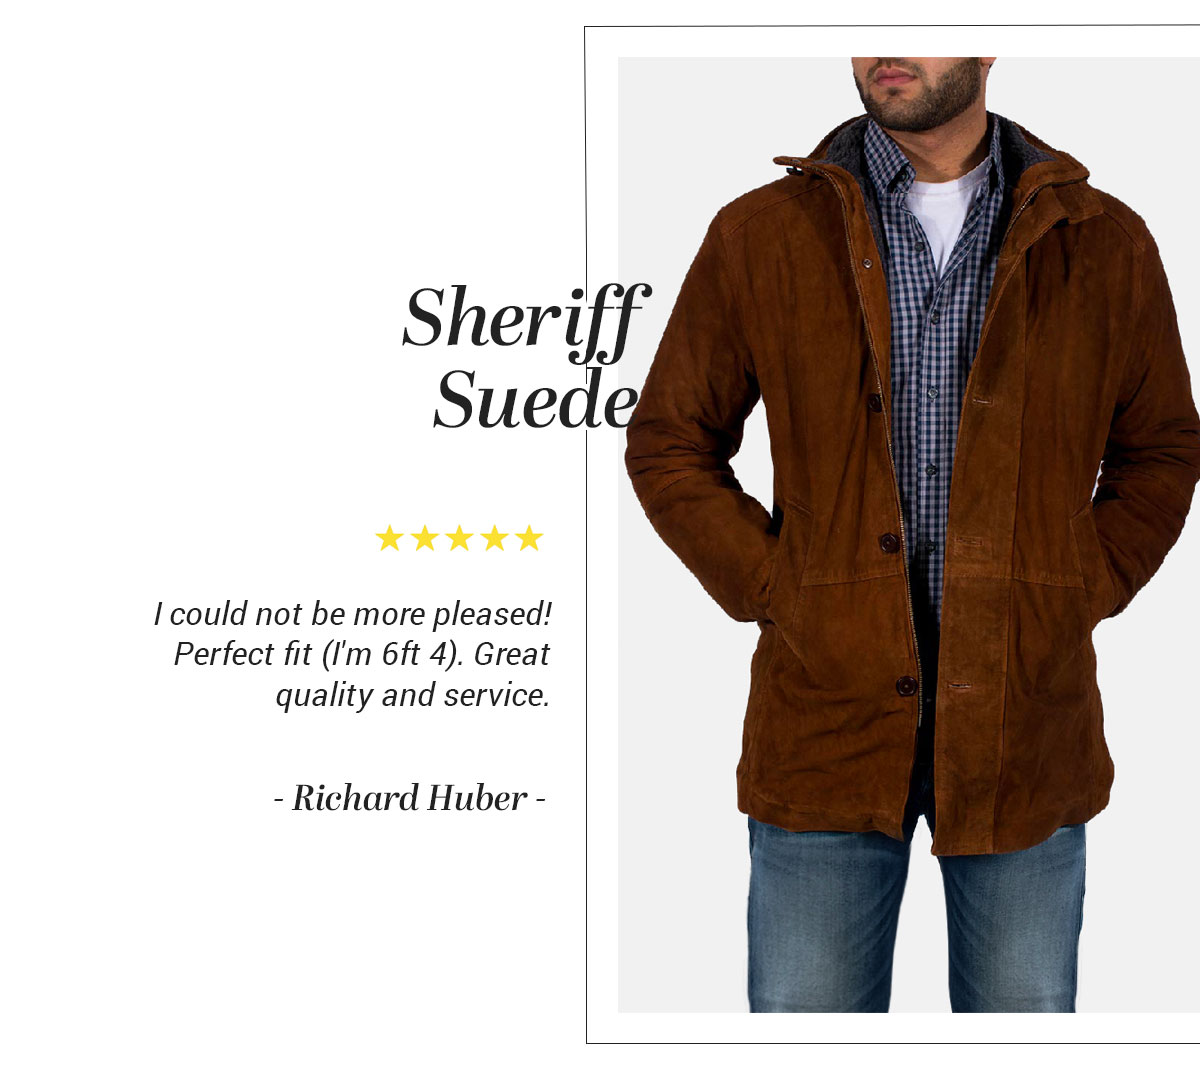 Sheriff Suede